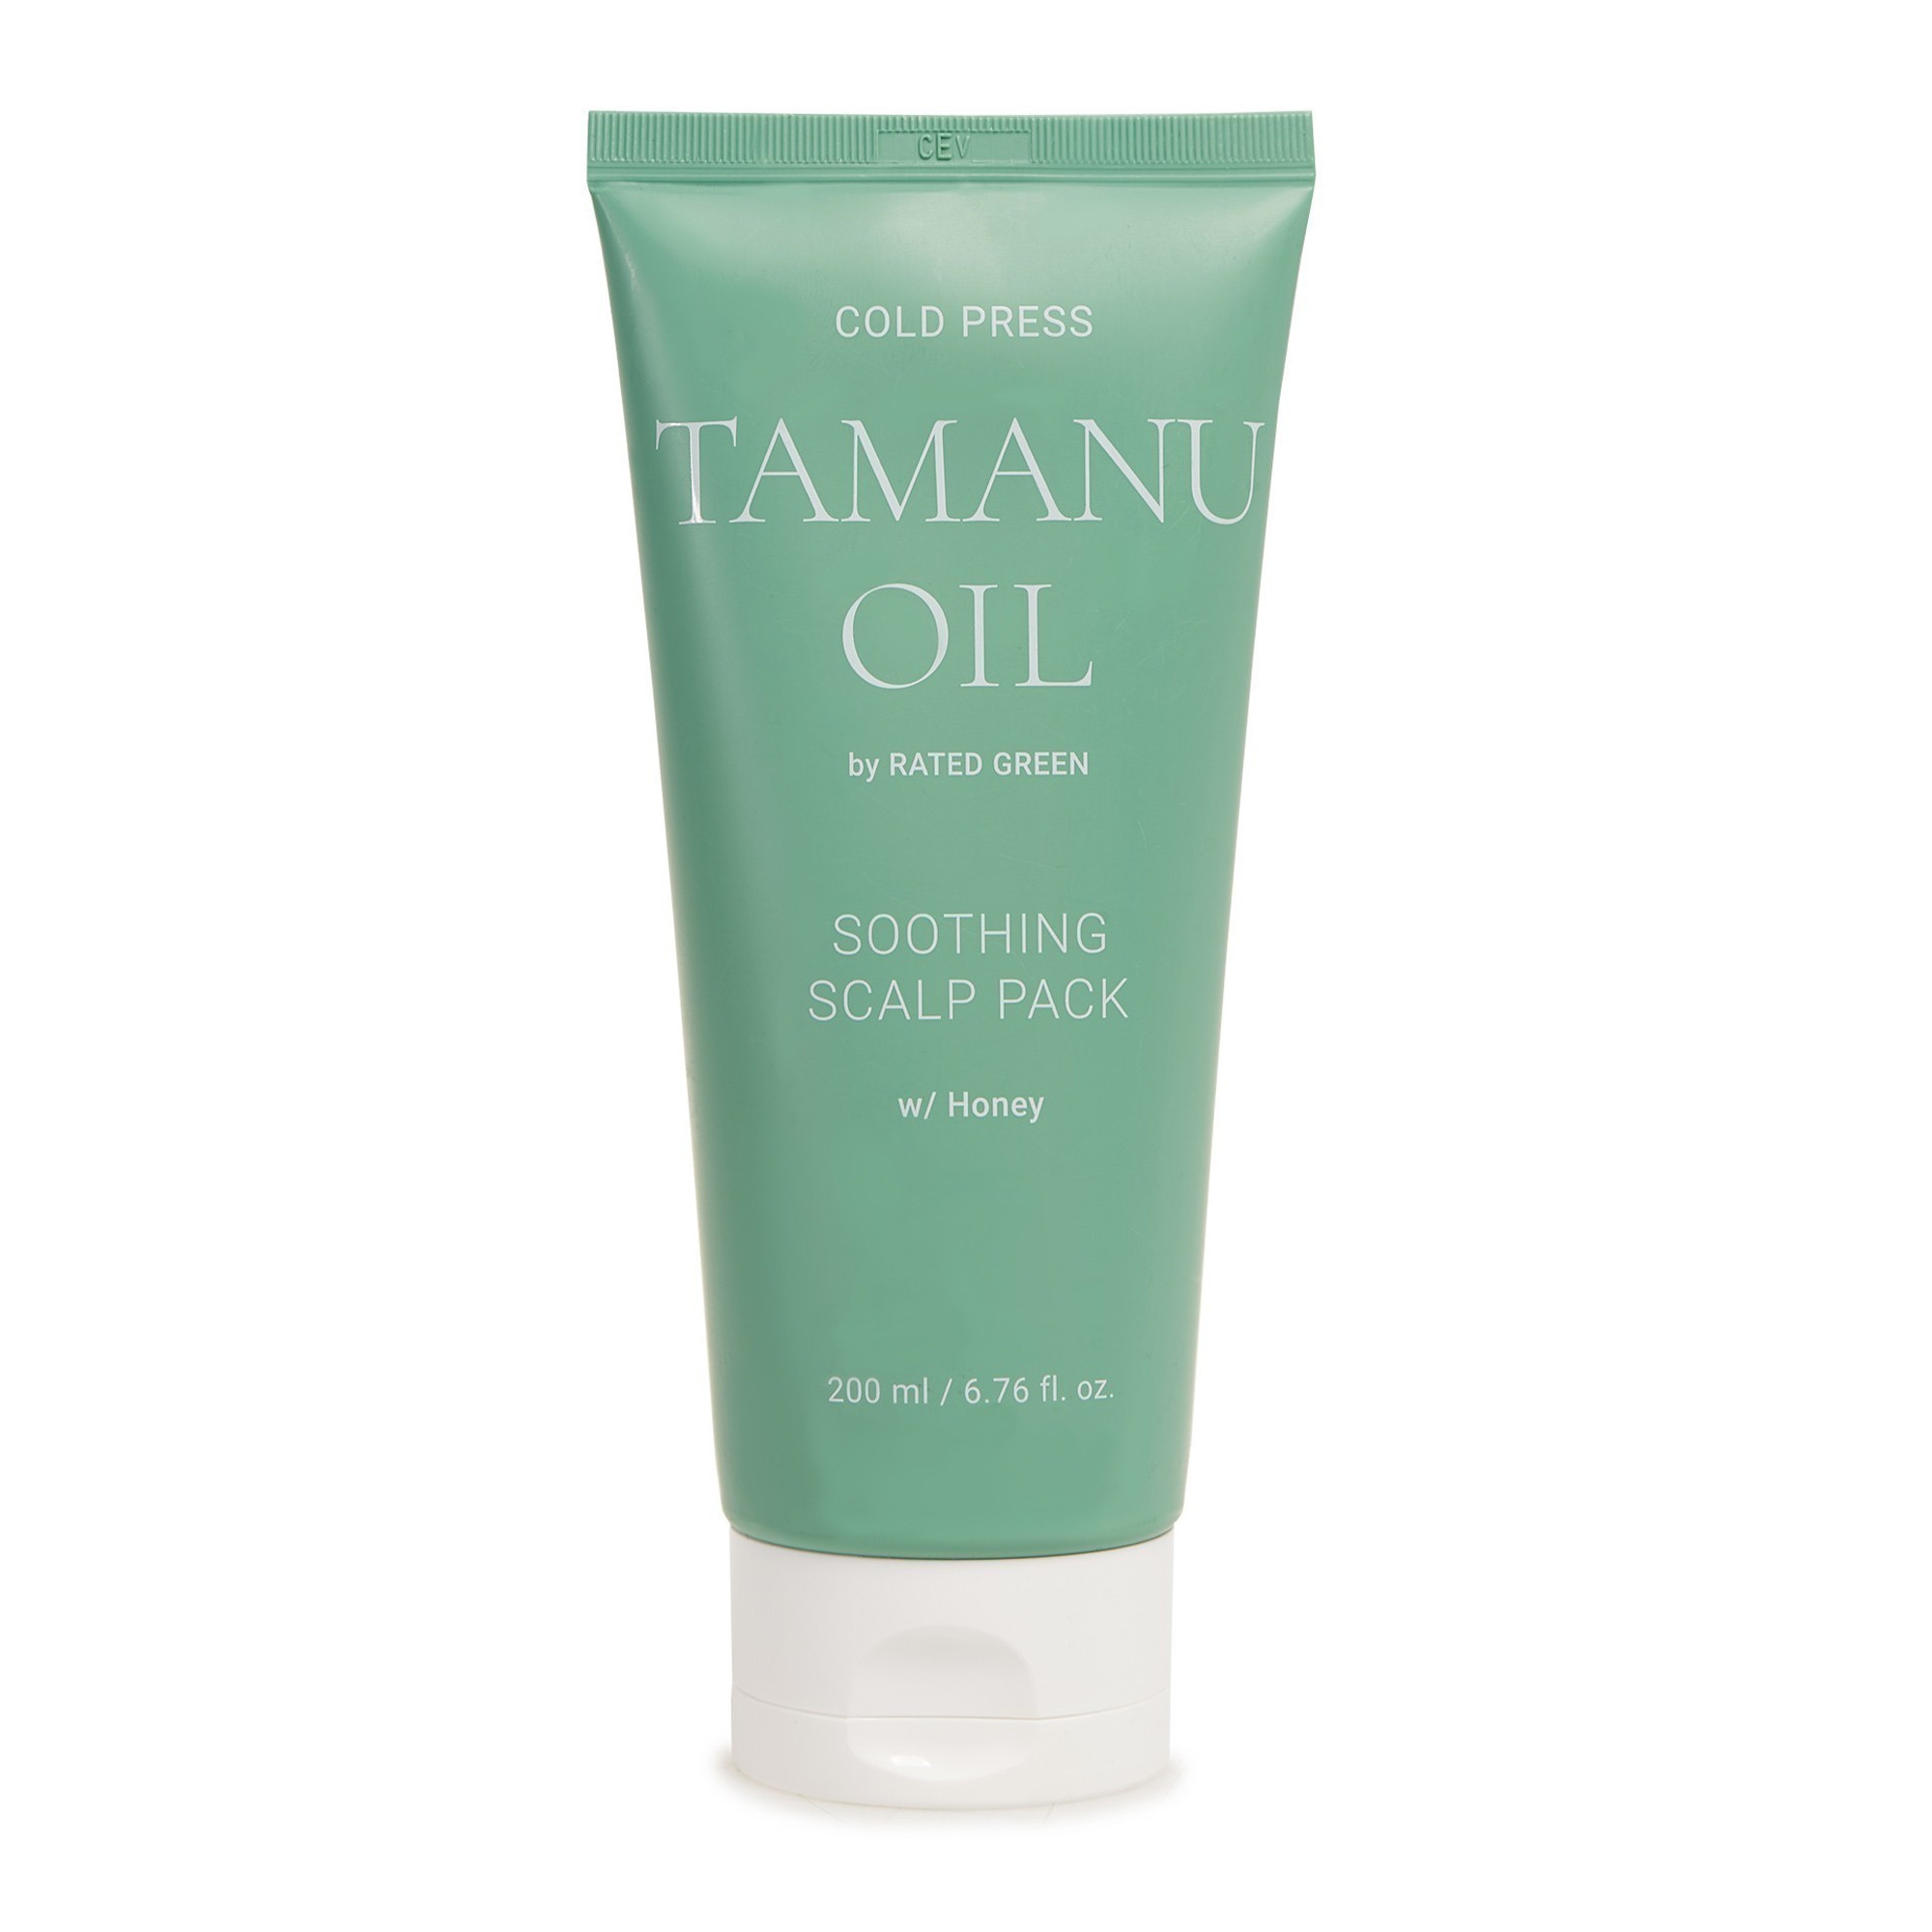 Маска для волосся Rated Green Tamanu Oil Soothing Scalp Pack W/ Black Currant